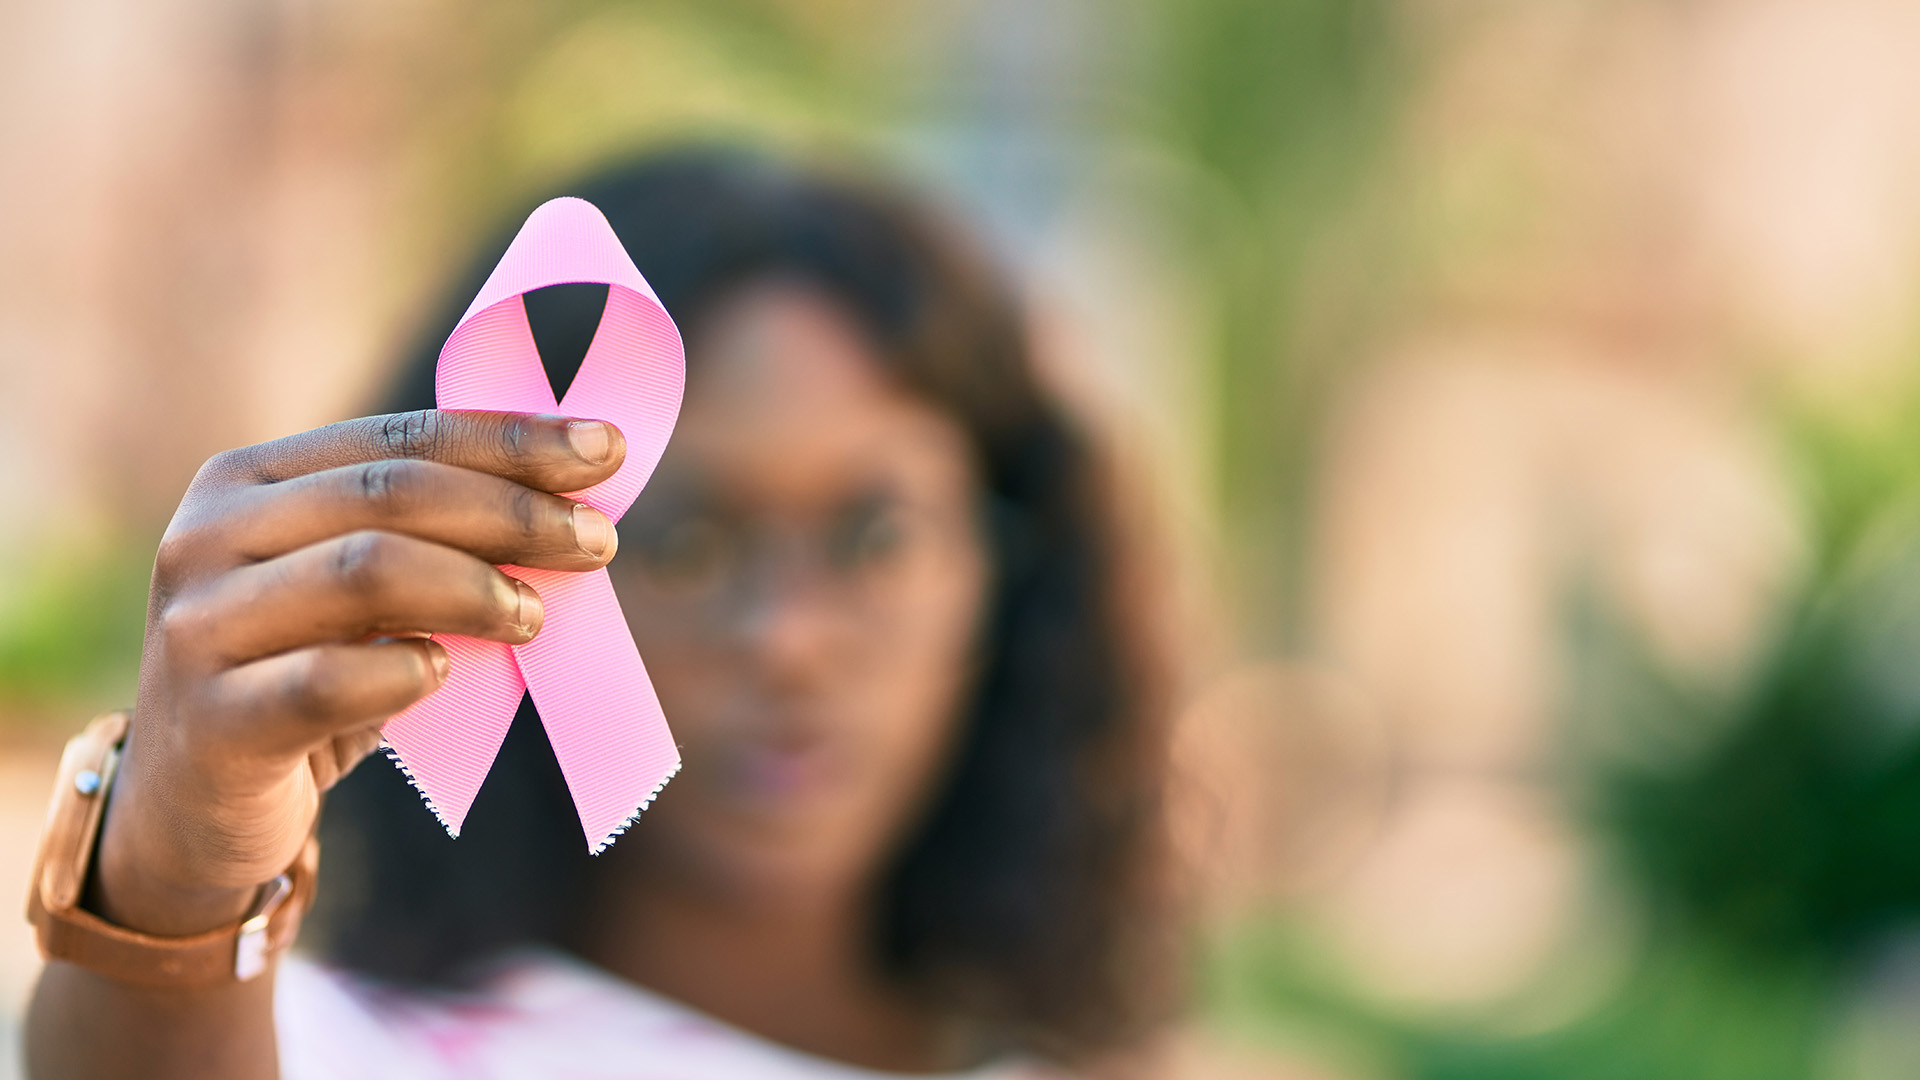 CPI in the Community | Fighting Breast Cancer | CPI Security